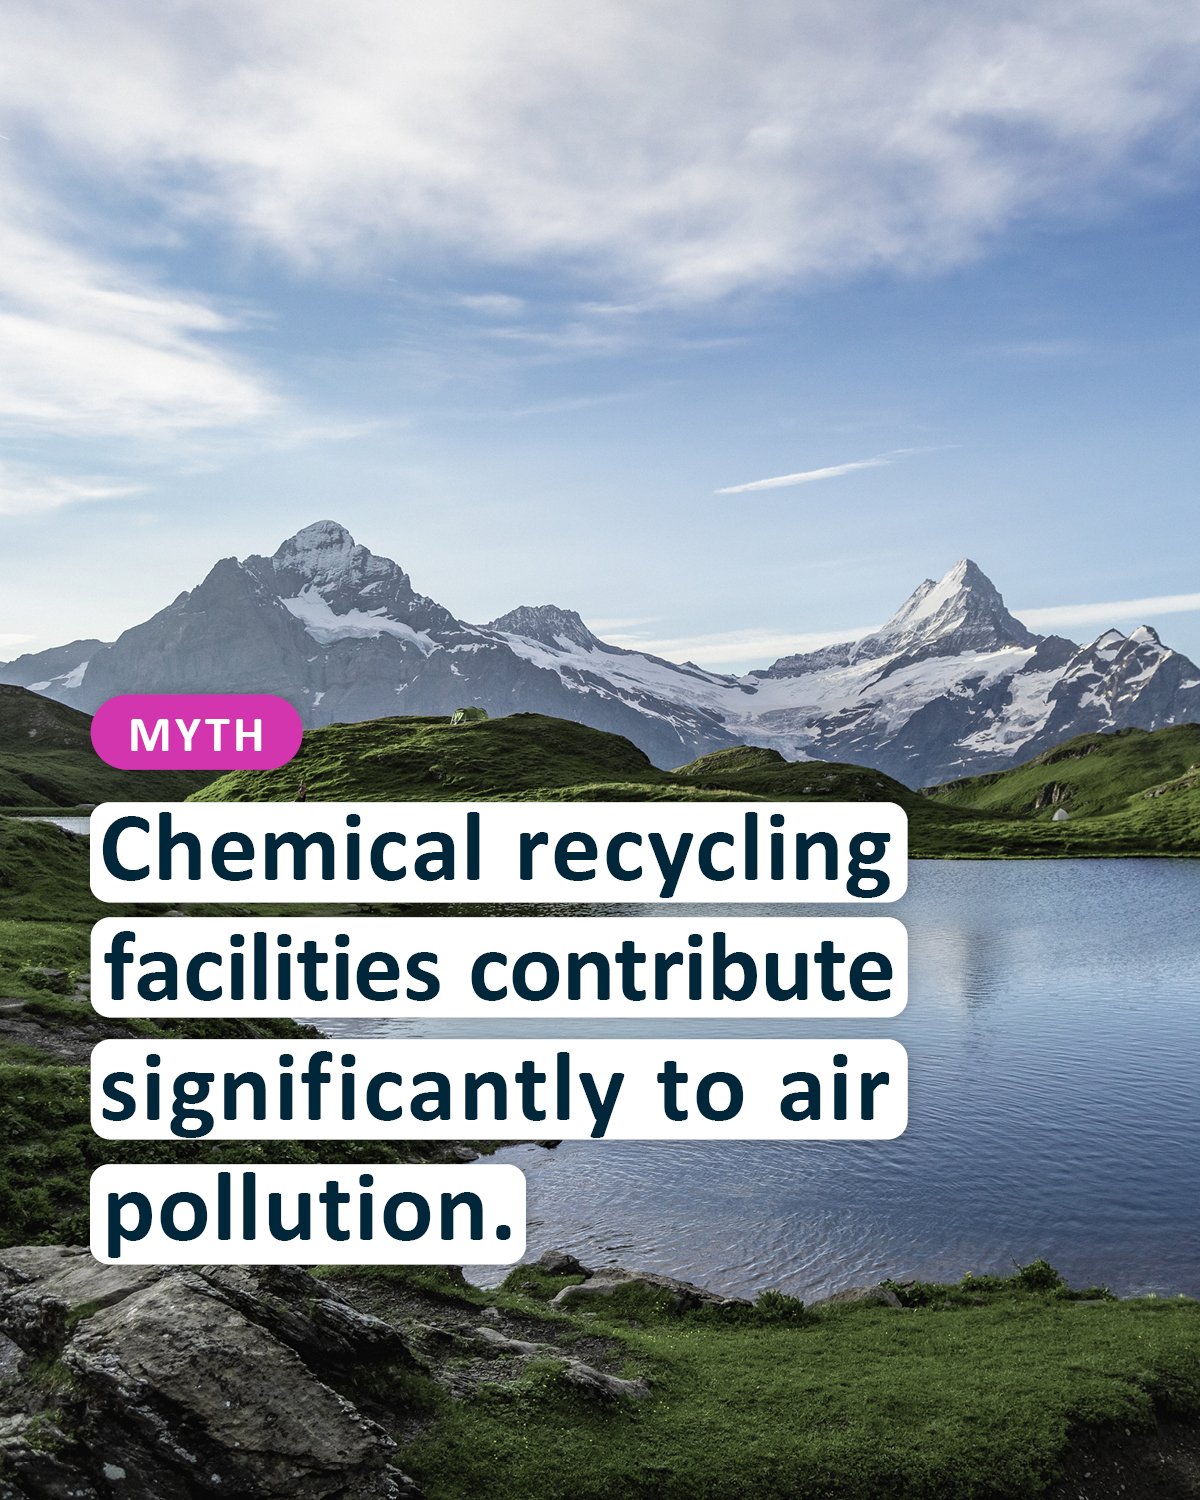 Myths-Facts-2022-AirPollution-IG-01.jpg